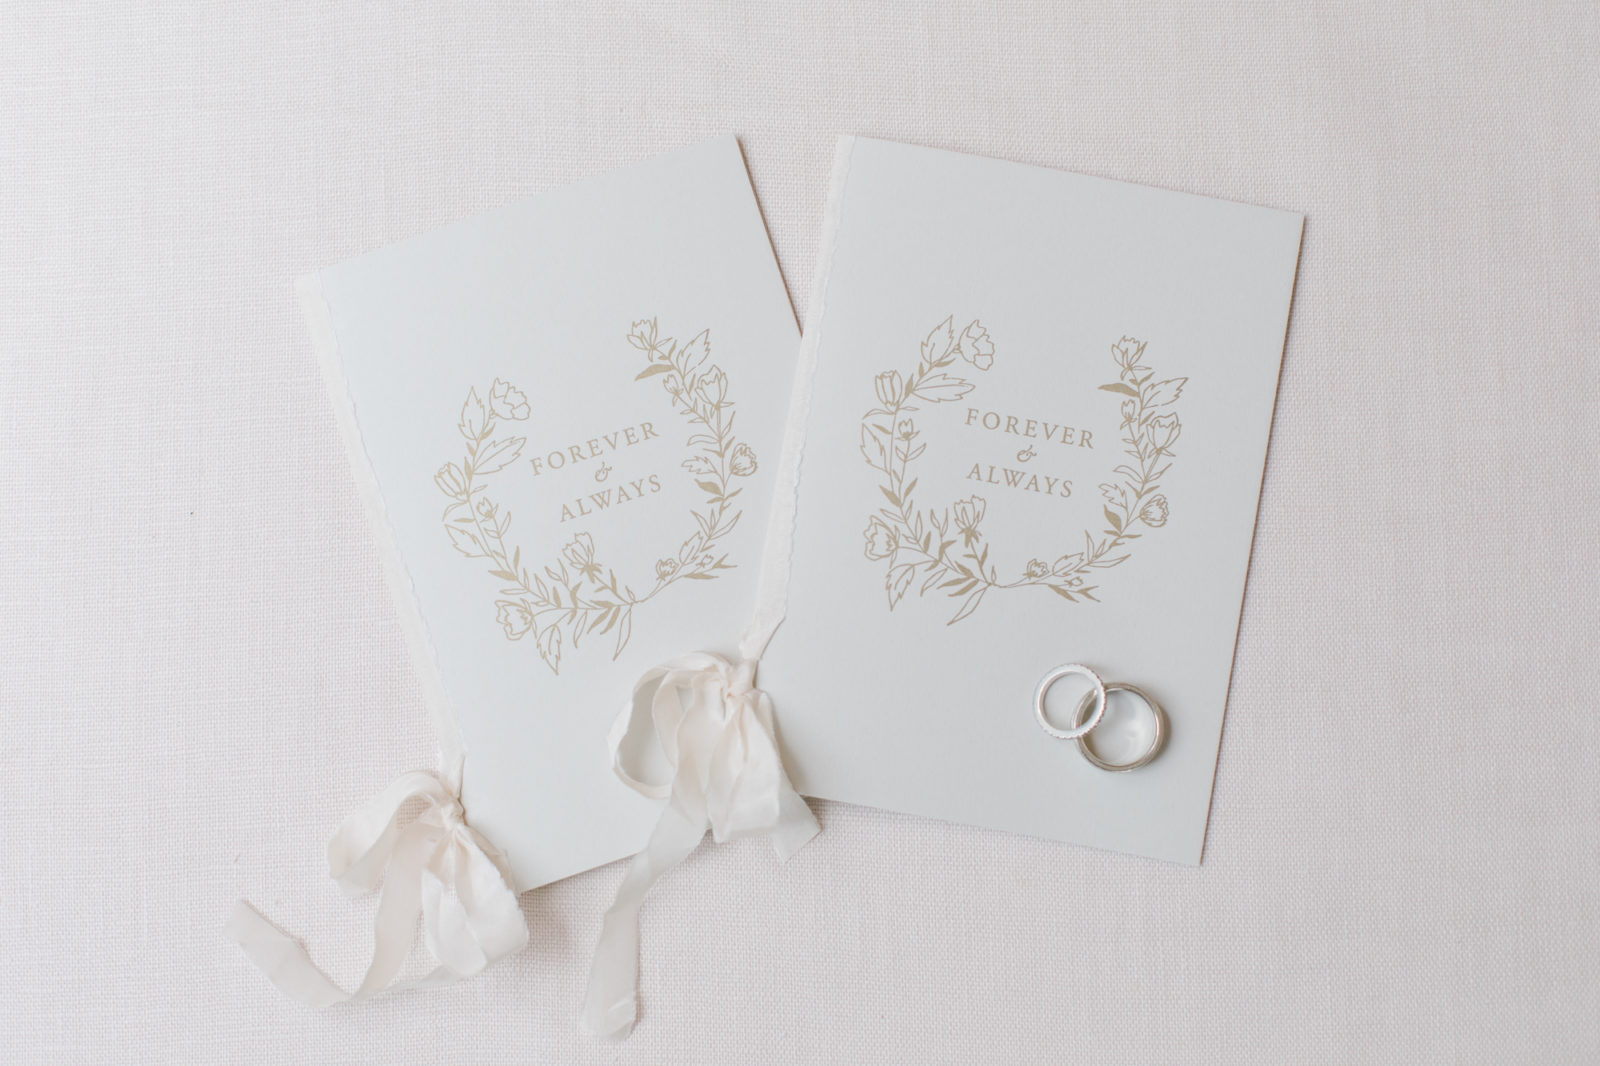 Romantic and classic his and her vow booklets